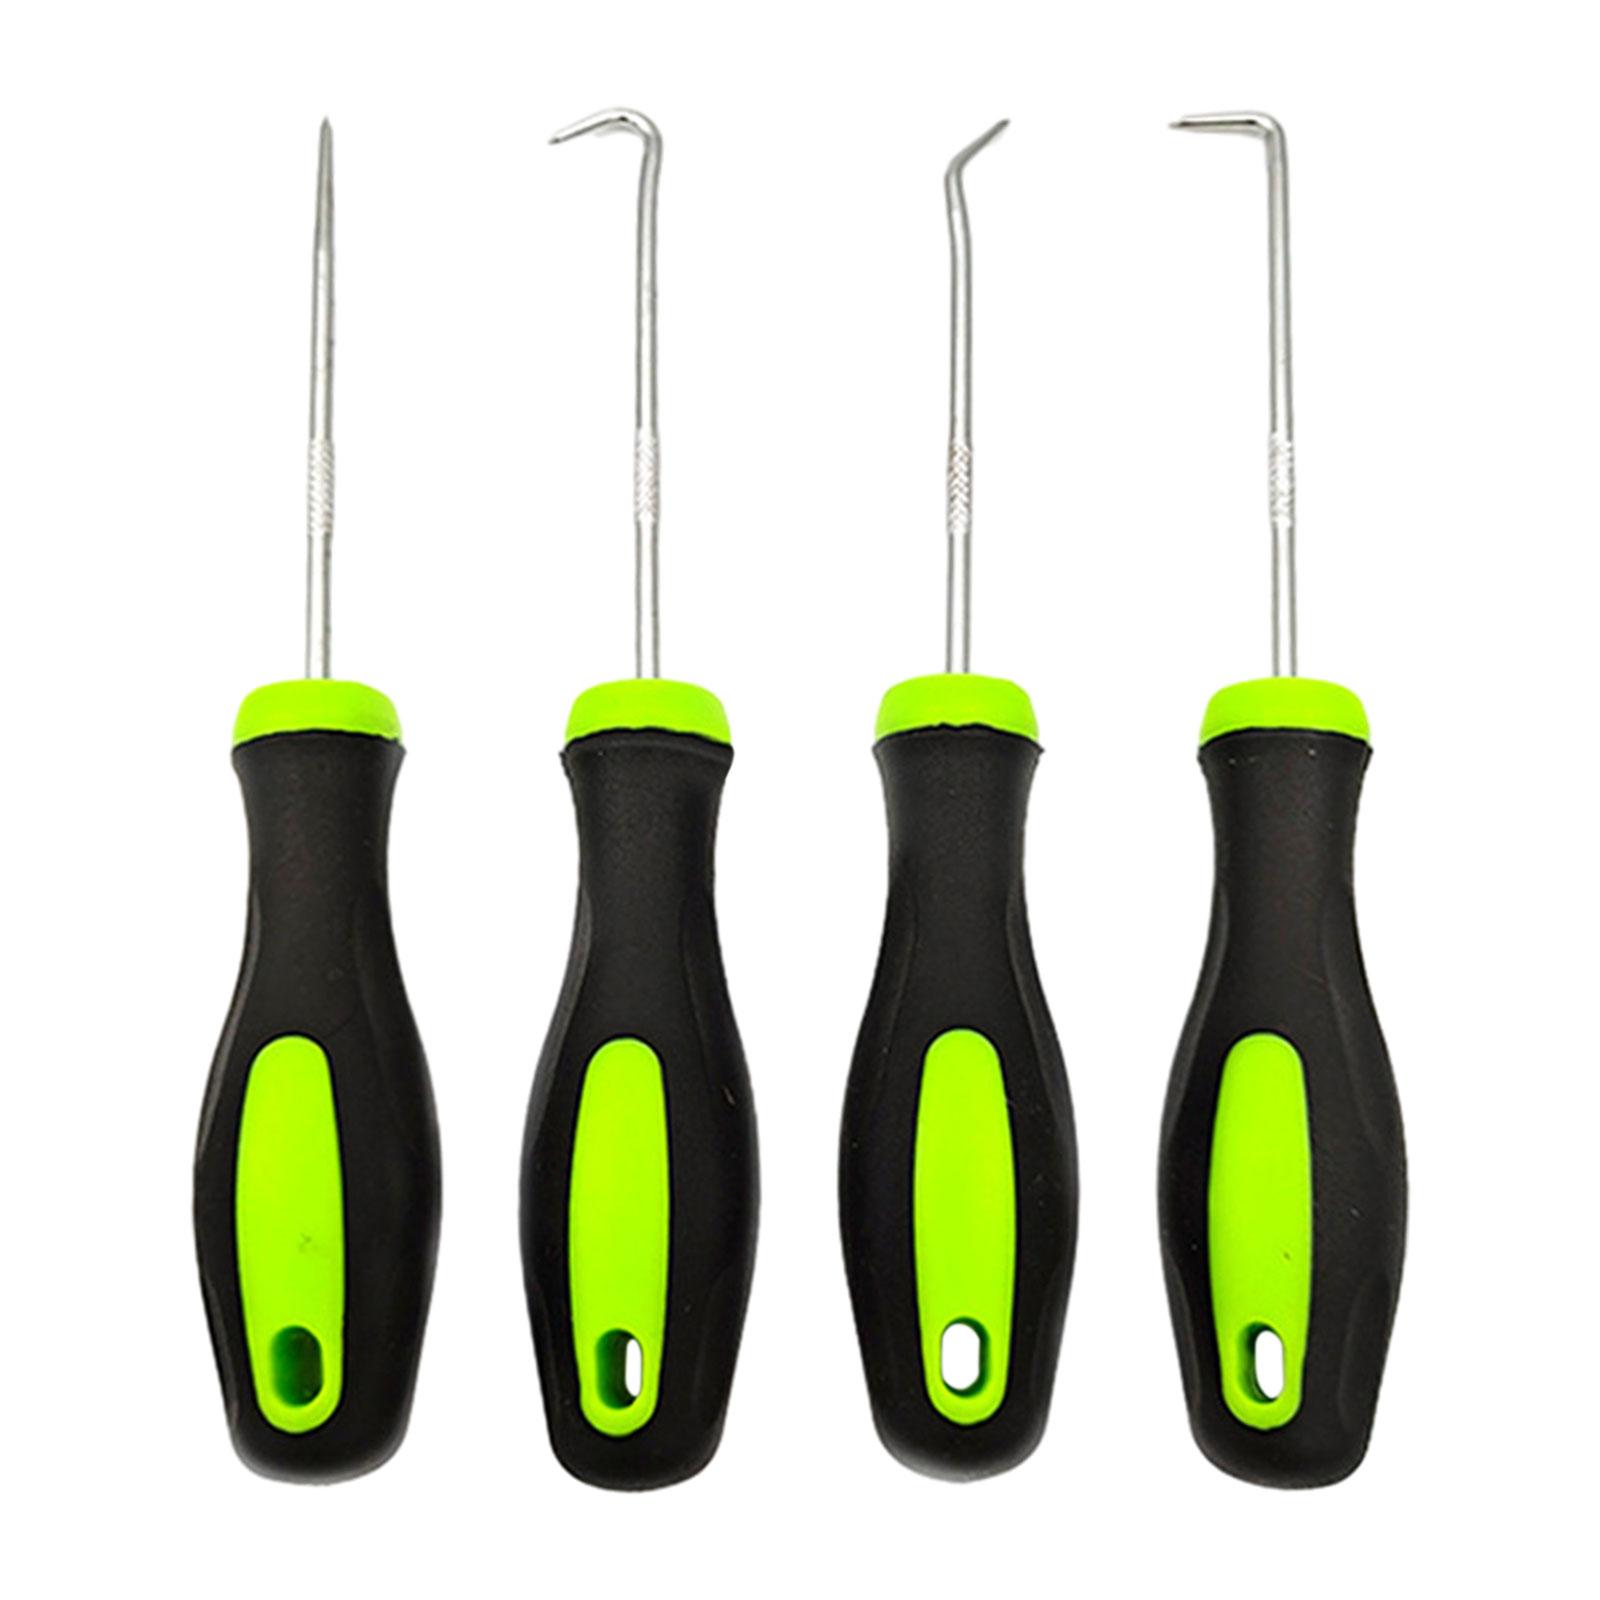 Oil Seal Puller Tool Pick and Hook Set Precision Sturdy Portable Repair Tool Green